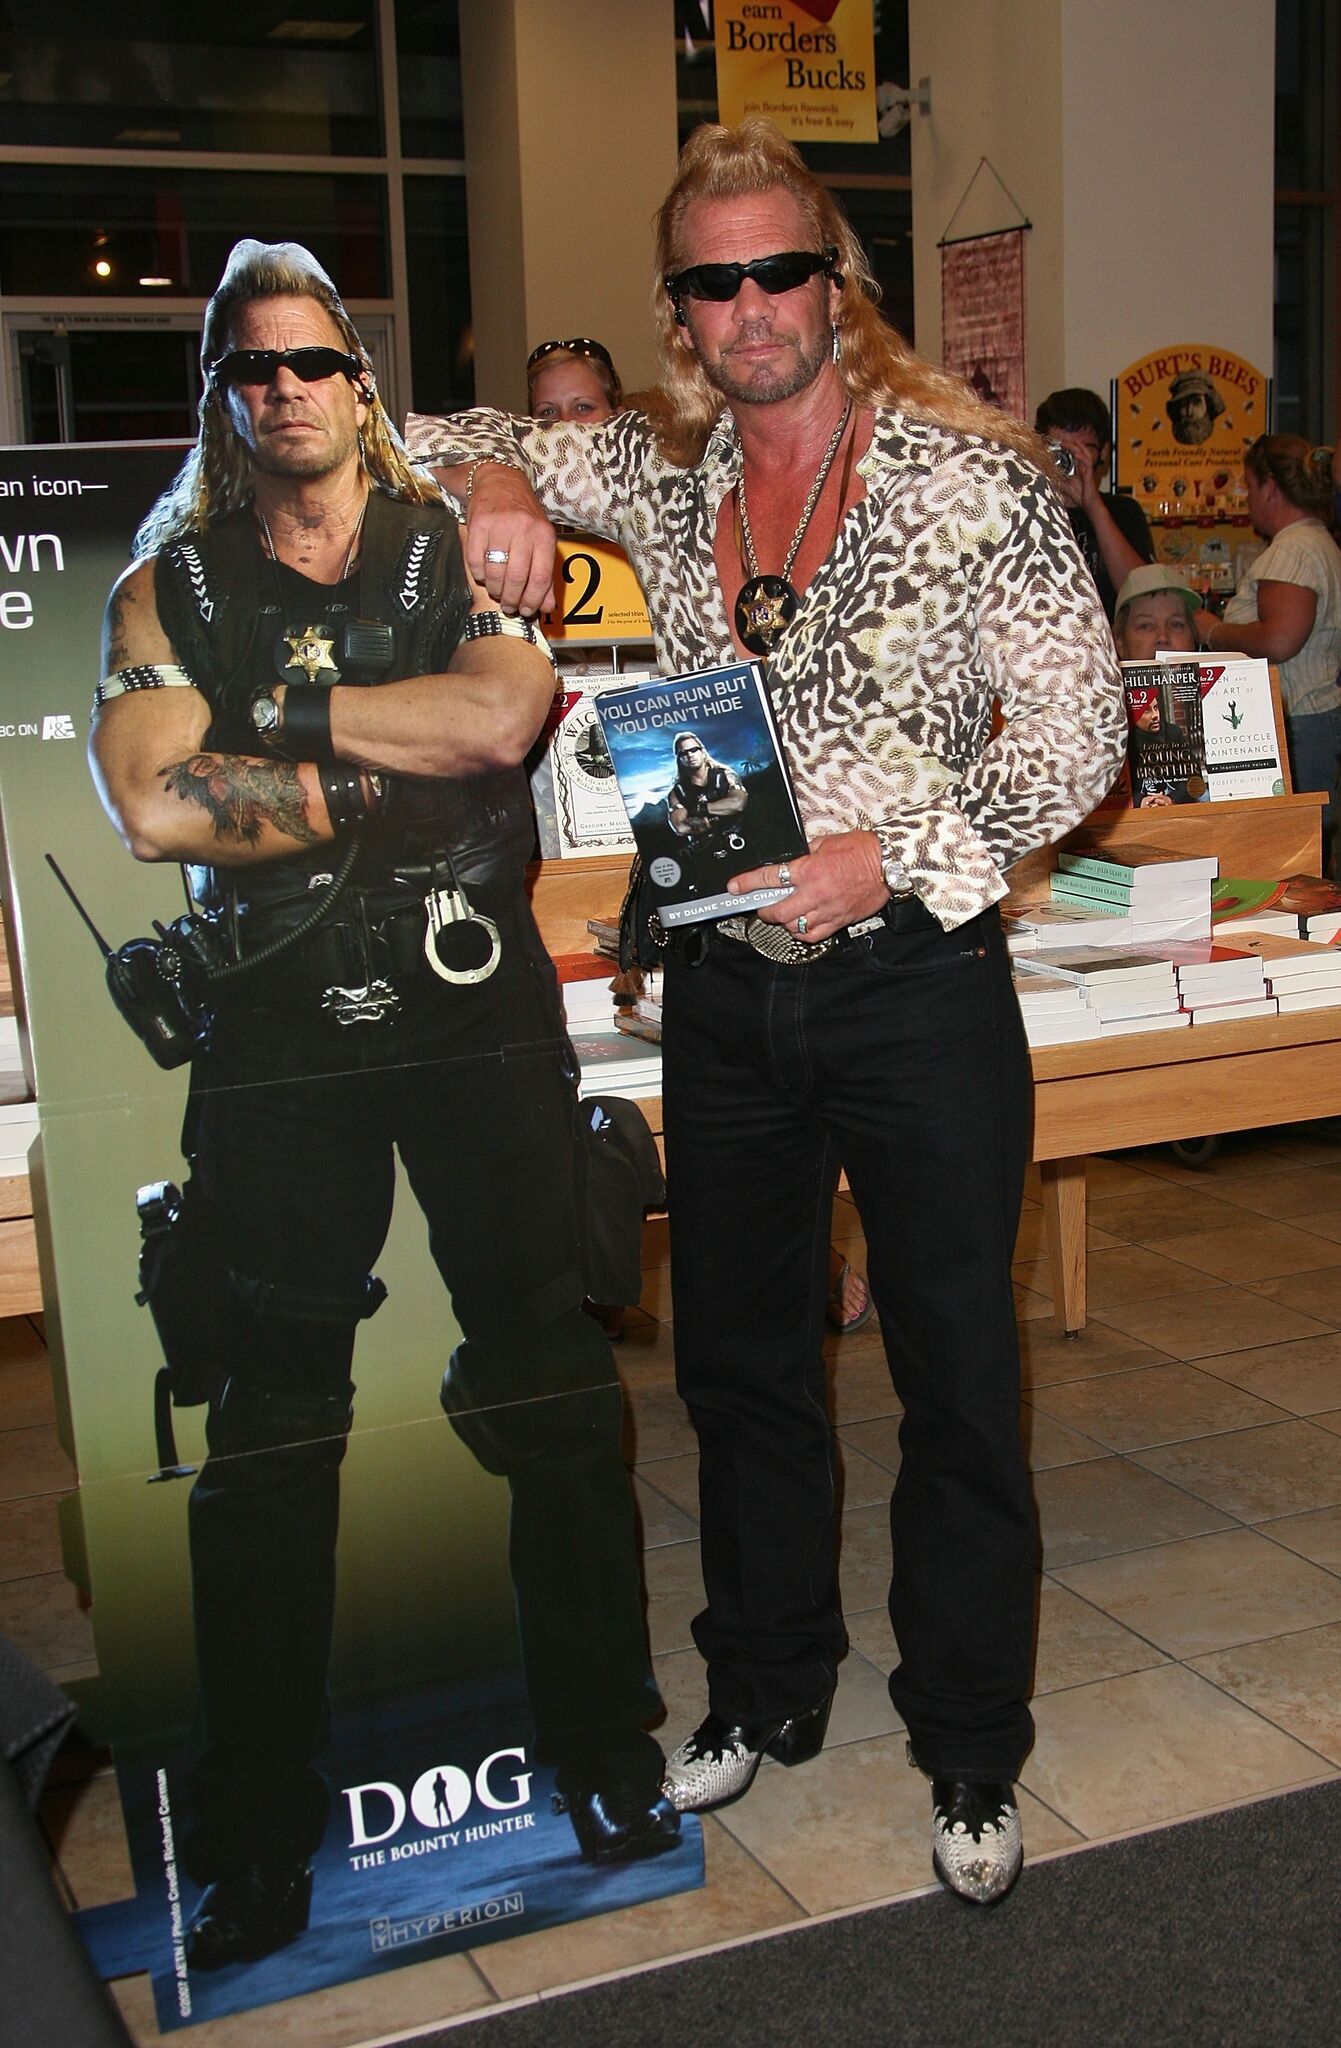  Duane "Dog" Chapman signs copies of his new book at Borders | Getty Images